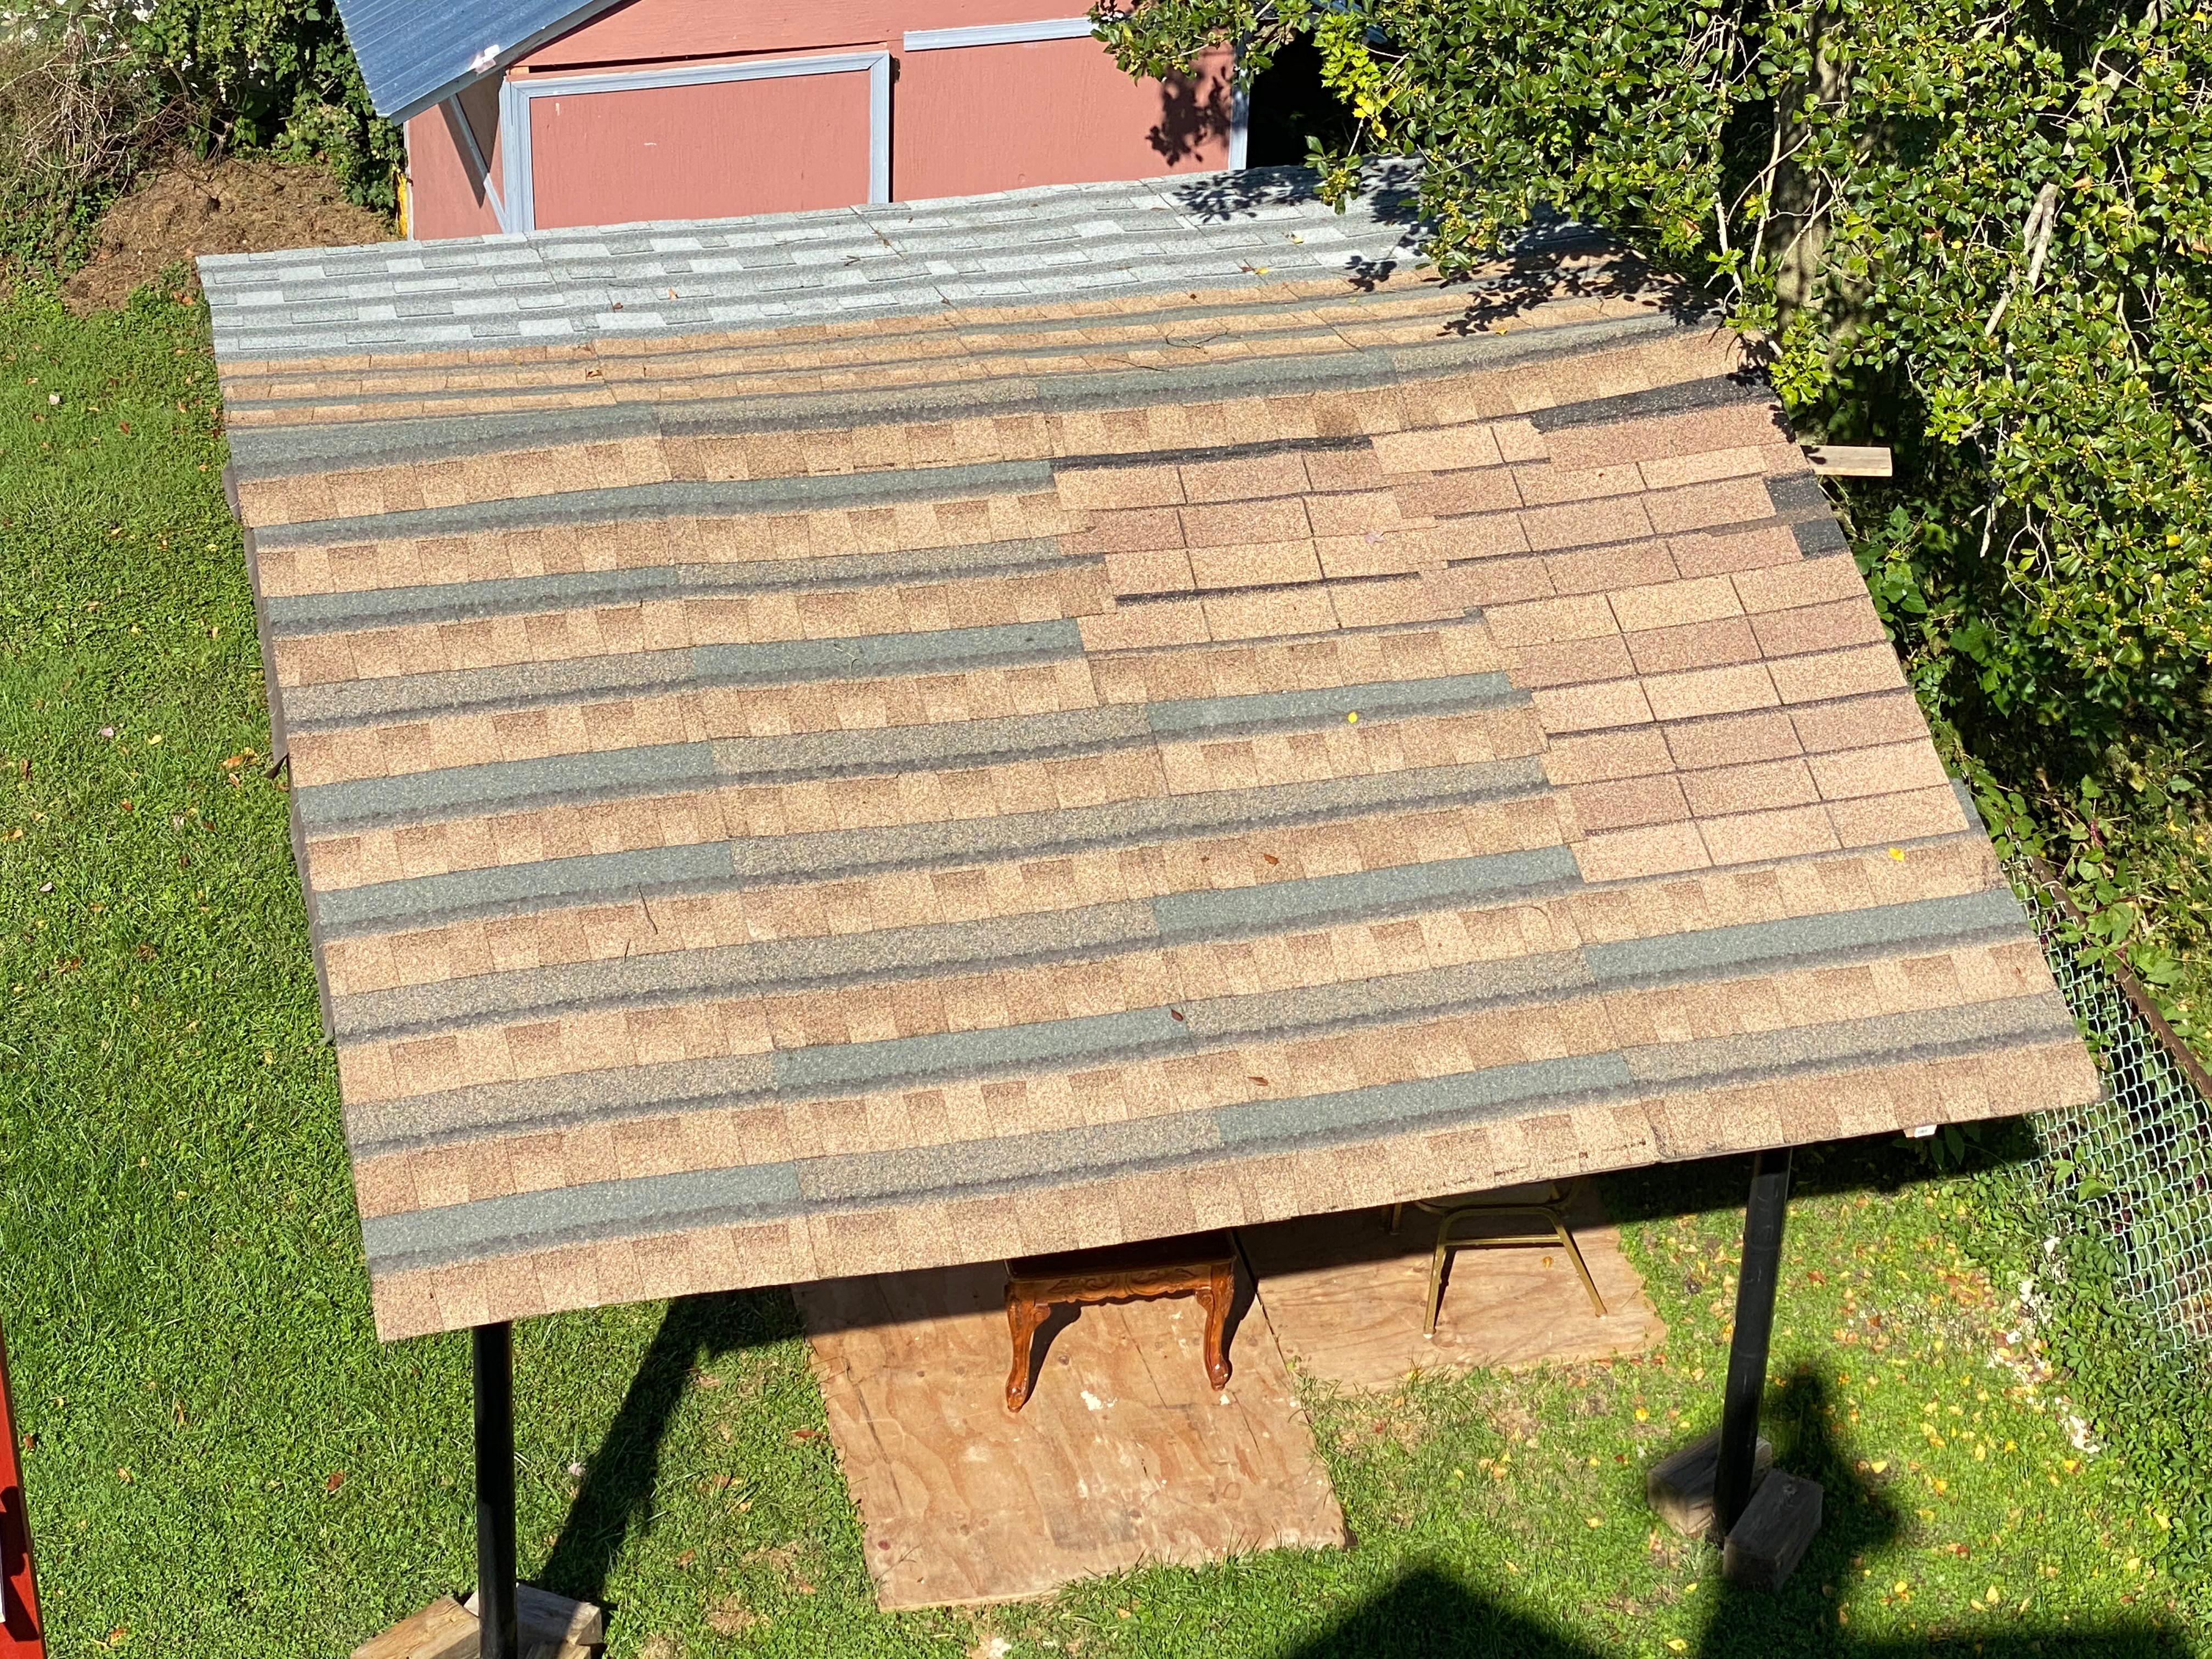 If you are going to attempt to install a small roof yourself, please watch at least one YouTube video.